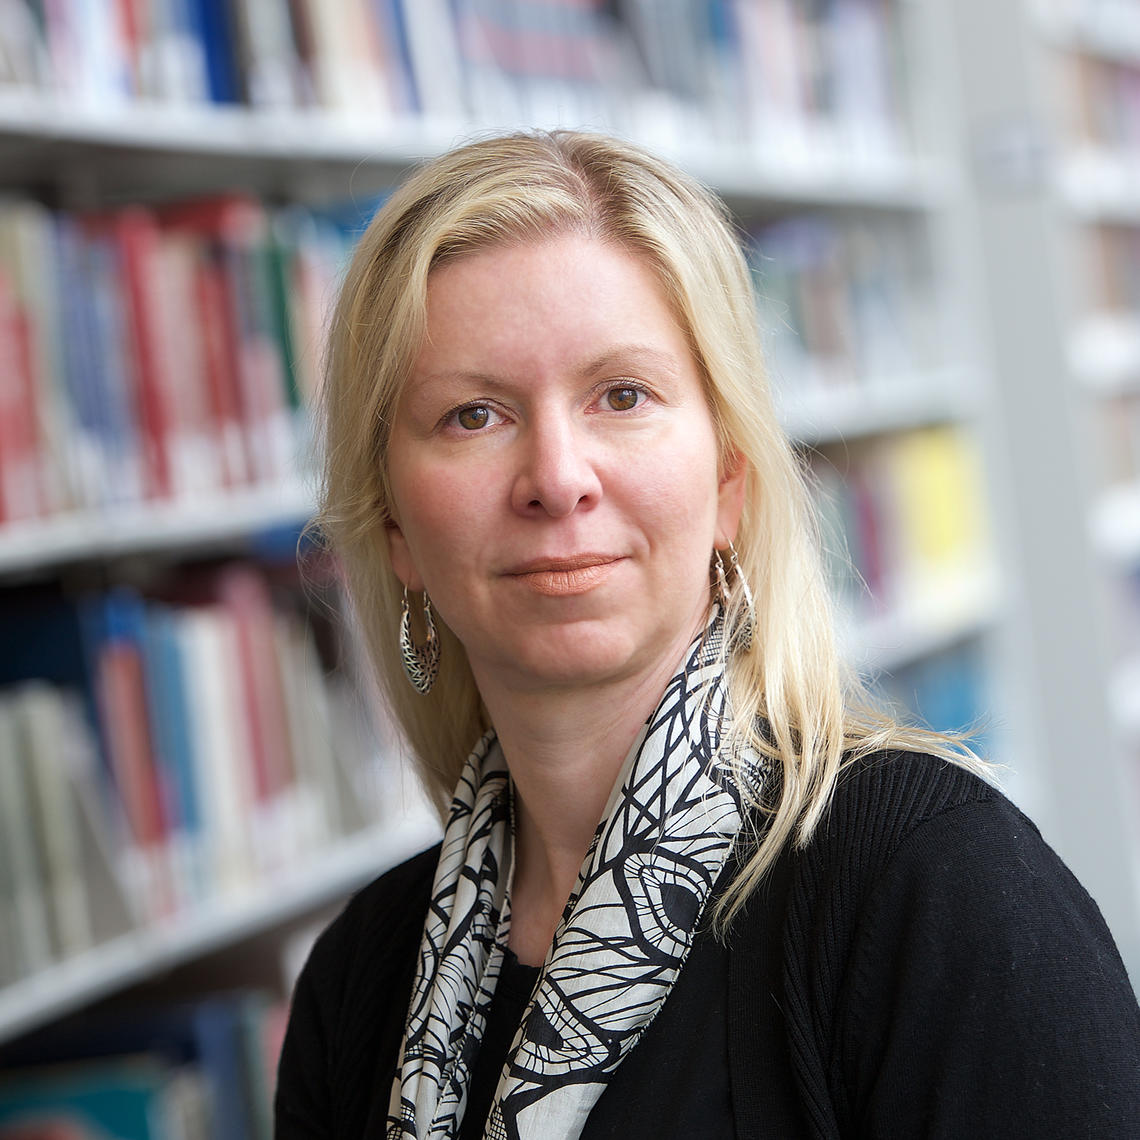 Marina Fischer, recipient of the 2018 award for continuing and professional education, says that it is "a true honour to receive a University of Calgary Teaching Award."